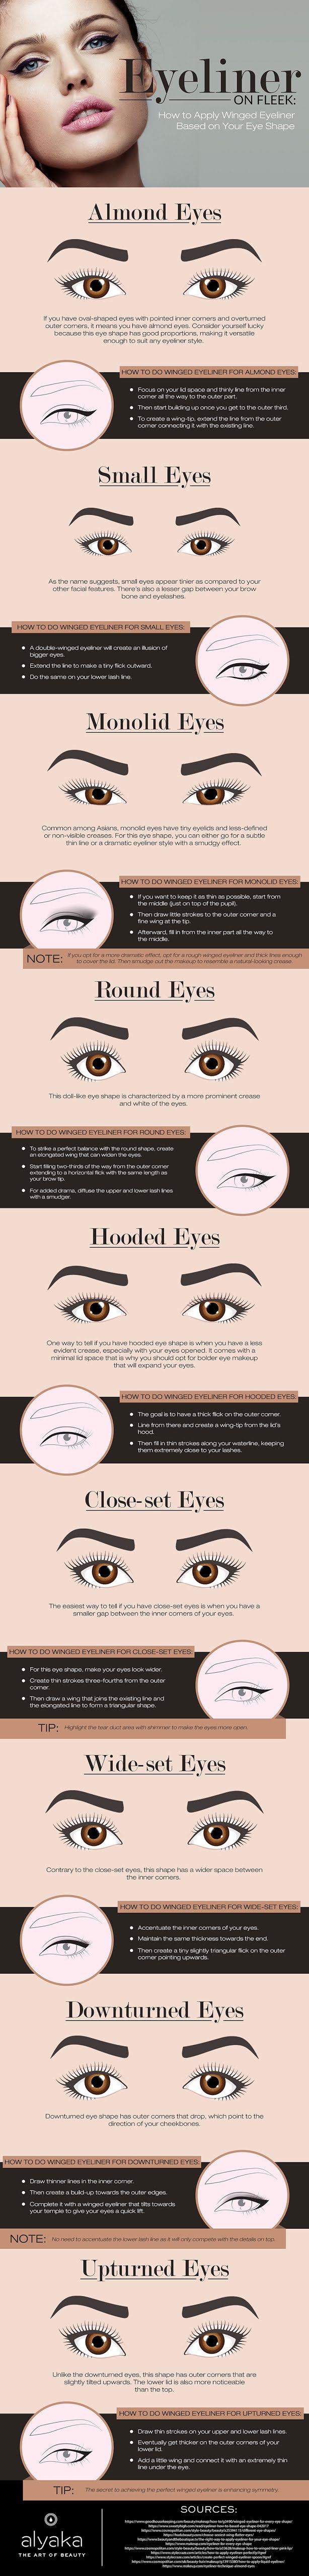 EYE MAKEUP BASICS: HOW TO DO WINGED EYELINER FOR DIFFERENT EYE SHAPES #Infographic